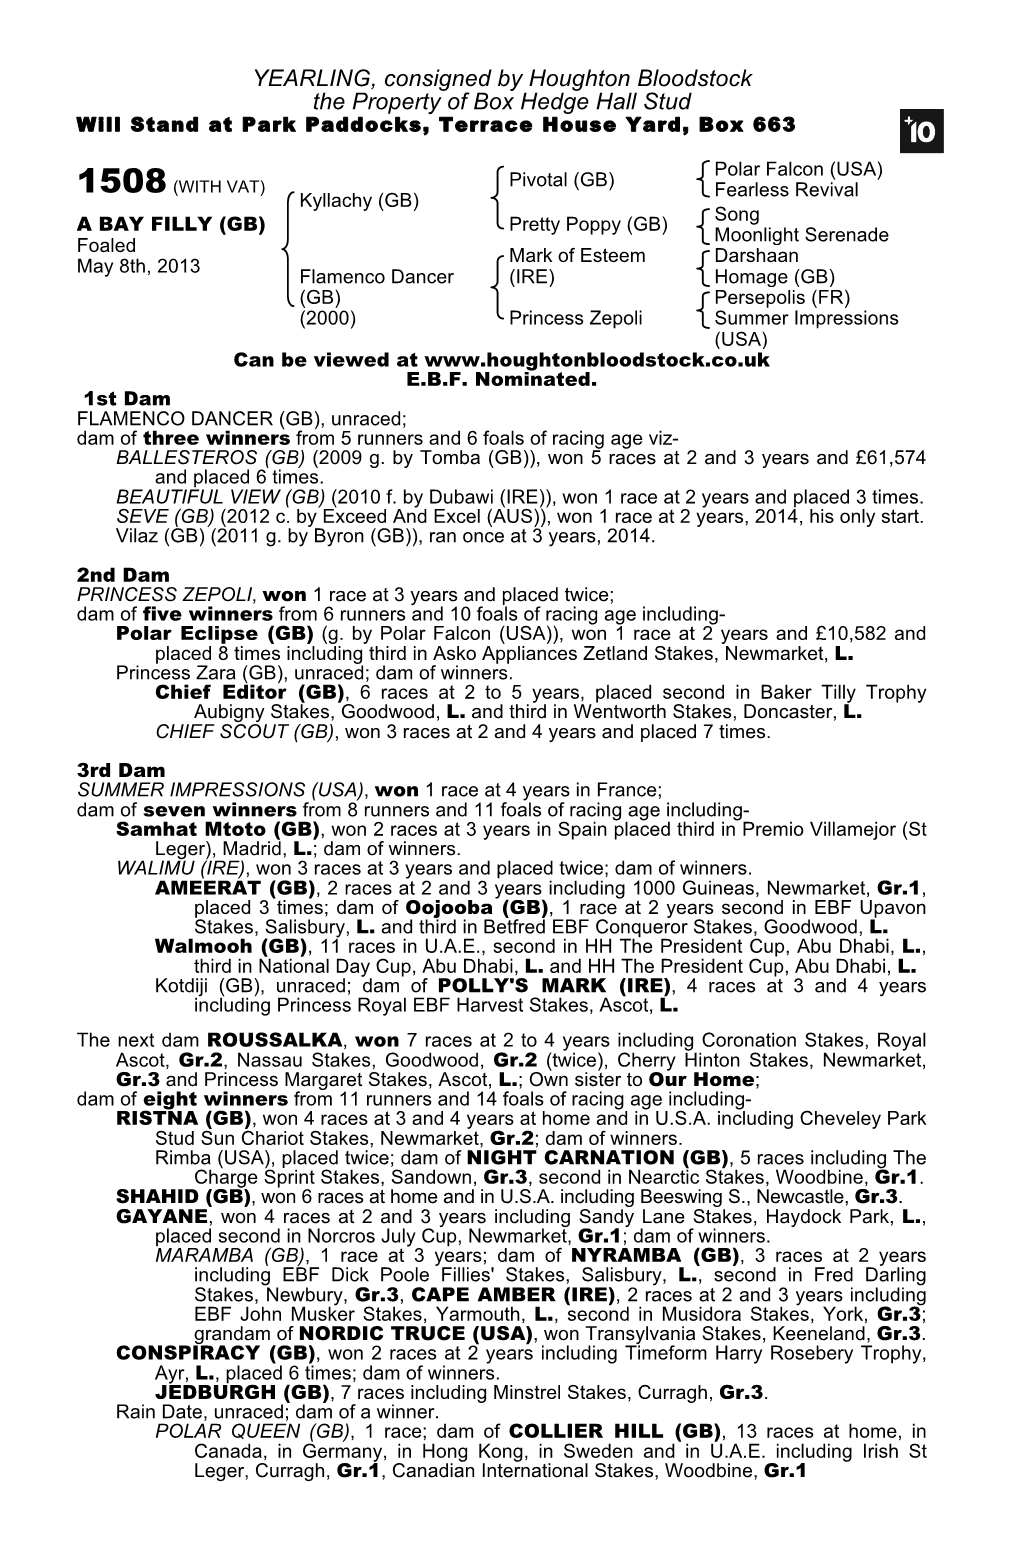 YEARLING, Consigned by Houghton Bloodstock the Property of Box Hedge Hall Stud Will Stand at Park Paddocks, Terrace House Yard, Box 663